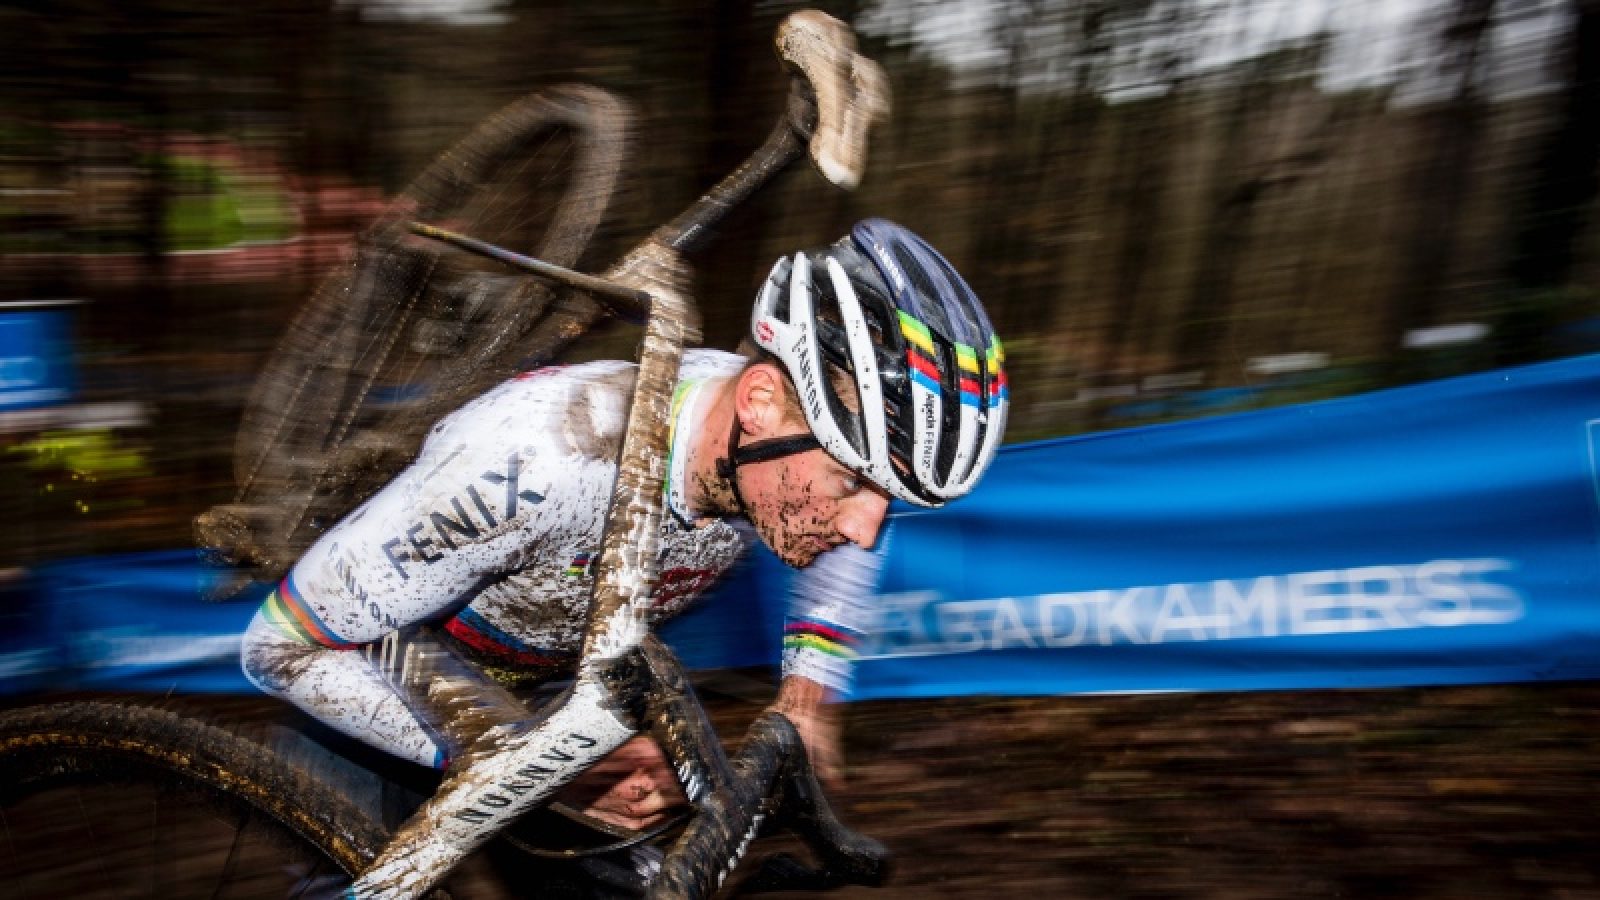 Dutch Mathieu Van Der Poel pictured in action during the men's elite race of the 'Herentals Crosst' cyclocross cycling race, the fourth stage (out of 8) of the 'X2O Badkamers Trofee Veldrijden' Trophy, Wednesday 23 December 2020 in Herentals. BELGA PHOTO JASPER JACOBS